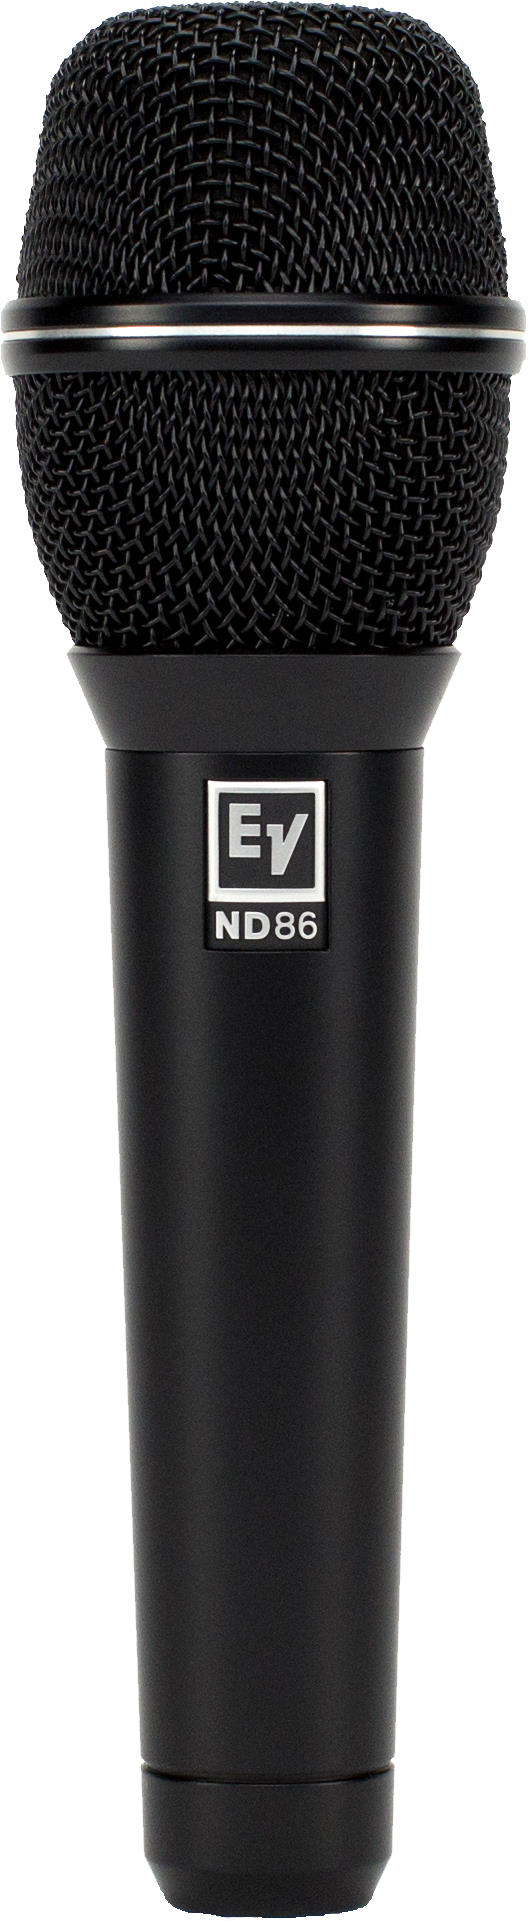 Electro-Voice ND86 Supercardioid Dynamic Handheld Vocal Microphone